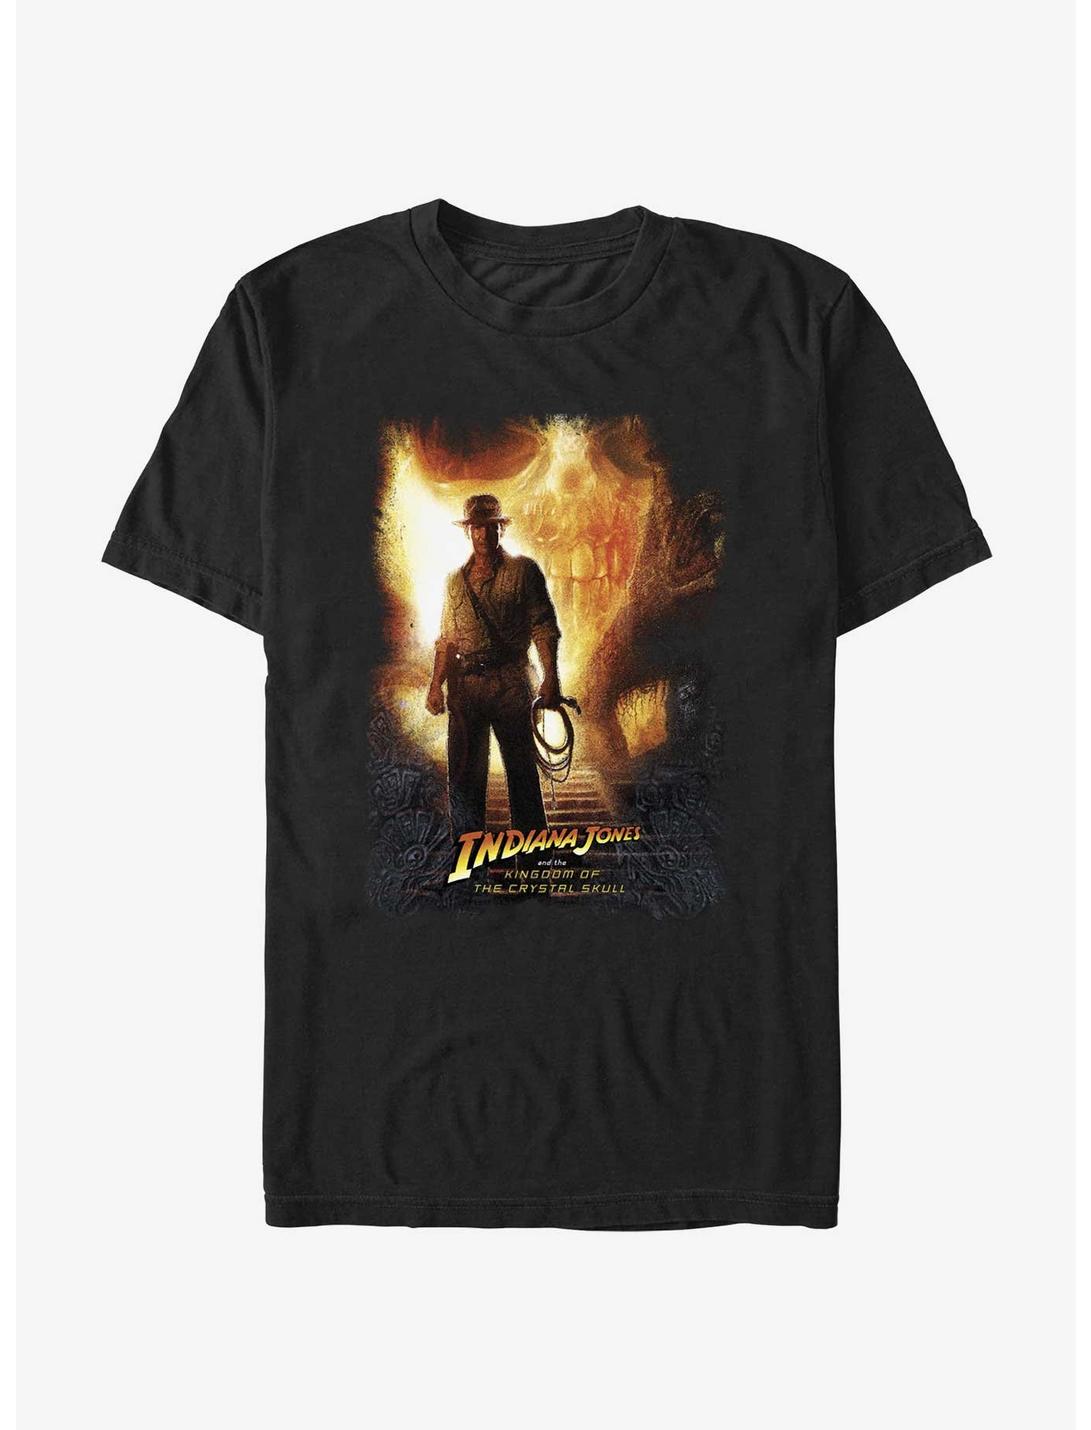 Indiana Jones and the Kingdom of the Crystal Skull Poster T-Shirt, BLACK, hi-res